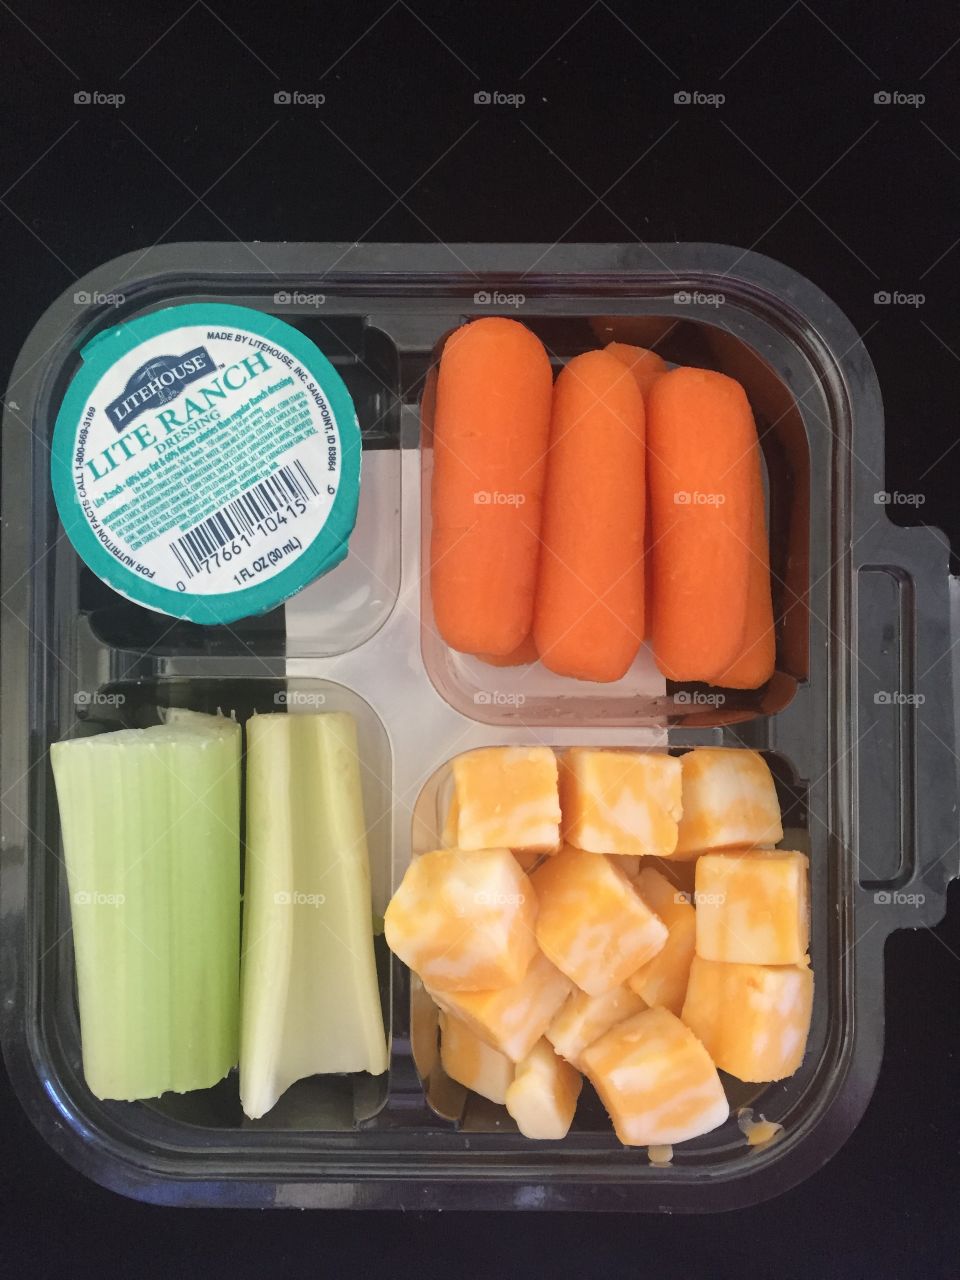 Veggies! Yum gotta love them.  Celery, Carrots, Cheese and Lite Ranch dip, great snack.  Although I kinda want a chocolate bar.  🤔